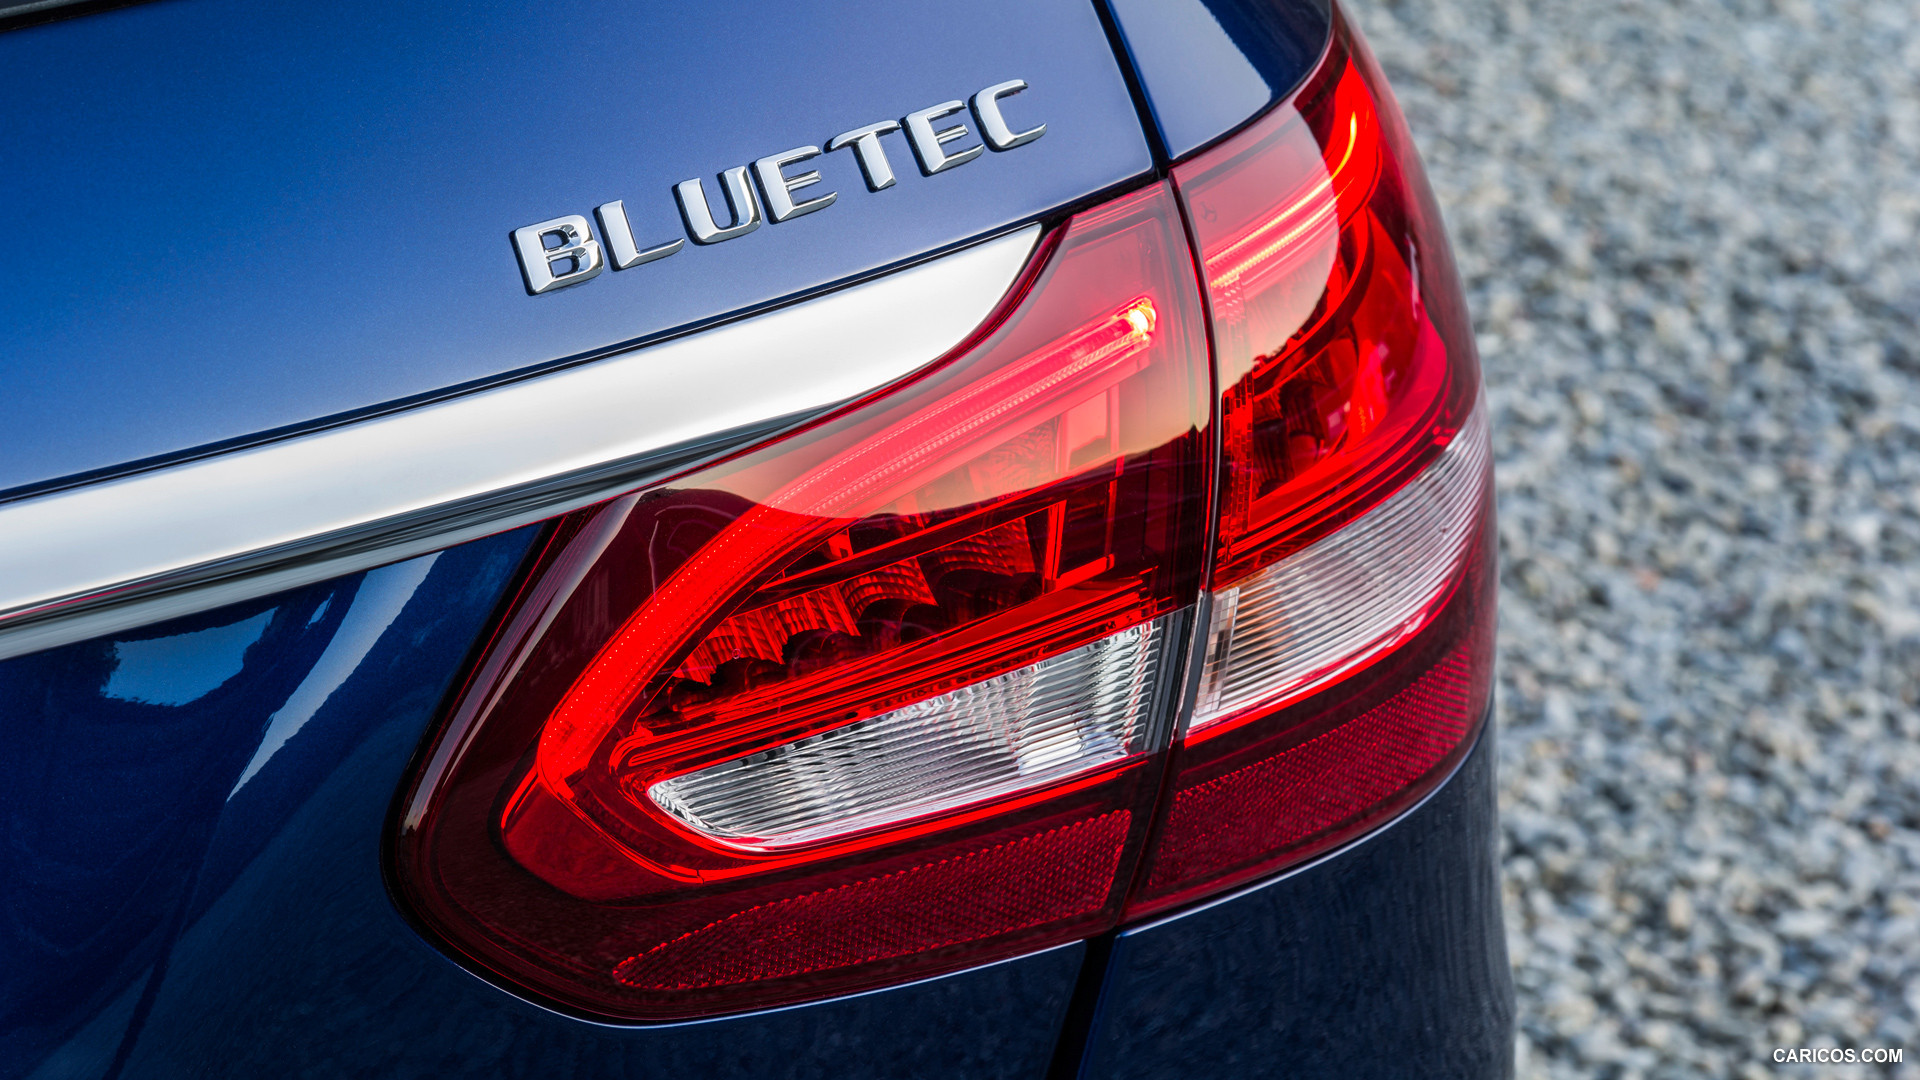 2015 Mercedes-Benz C-Class Estate C250 BlueTEC 4MATIC (AMG sports package) - Tail Light, #46 of 173